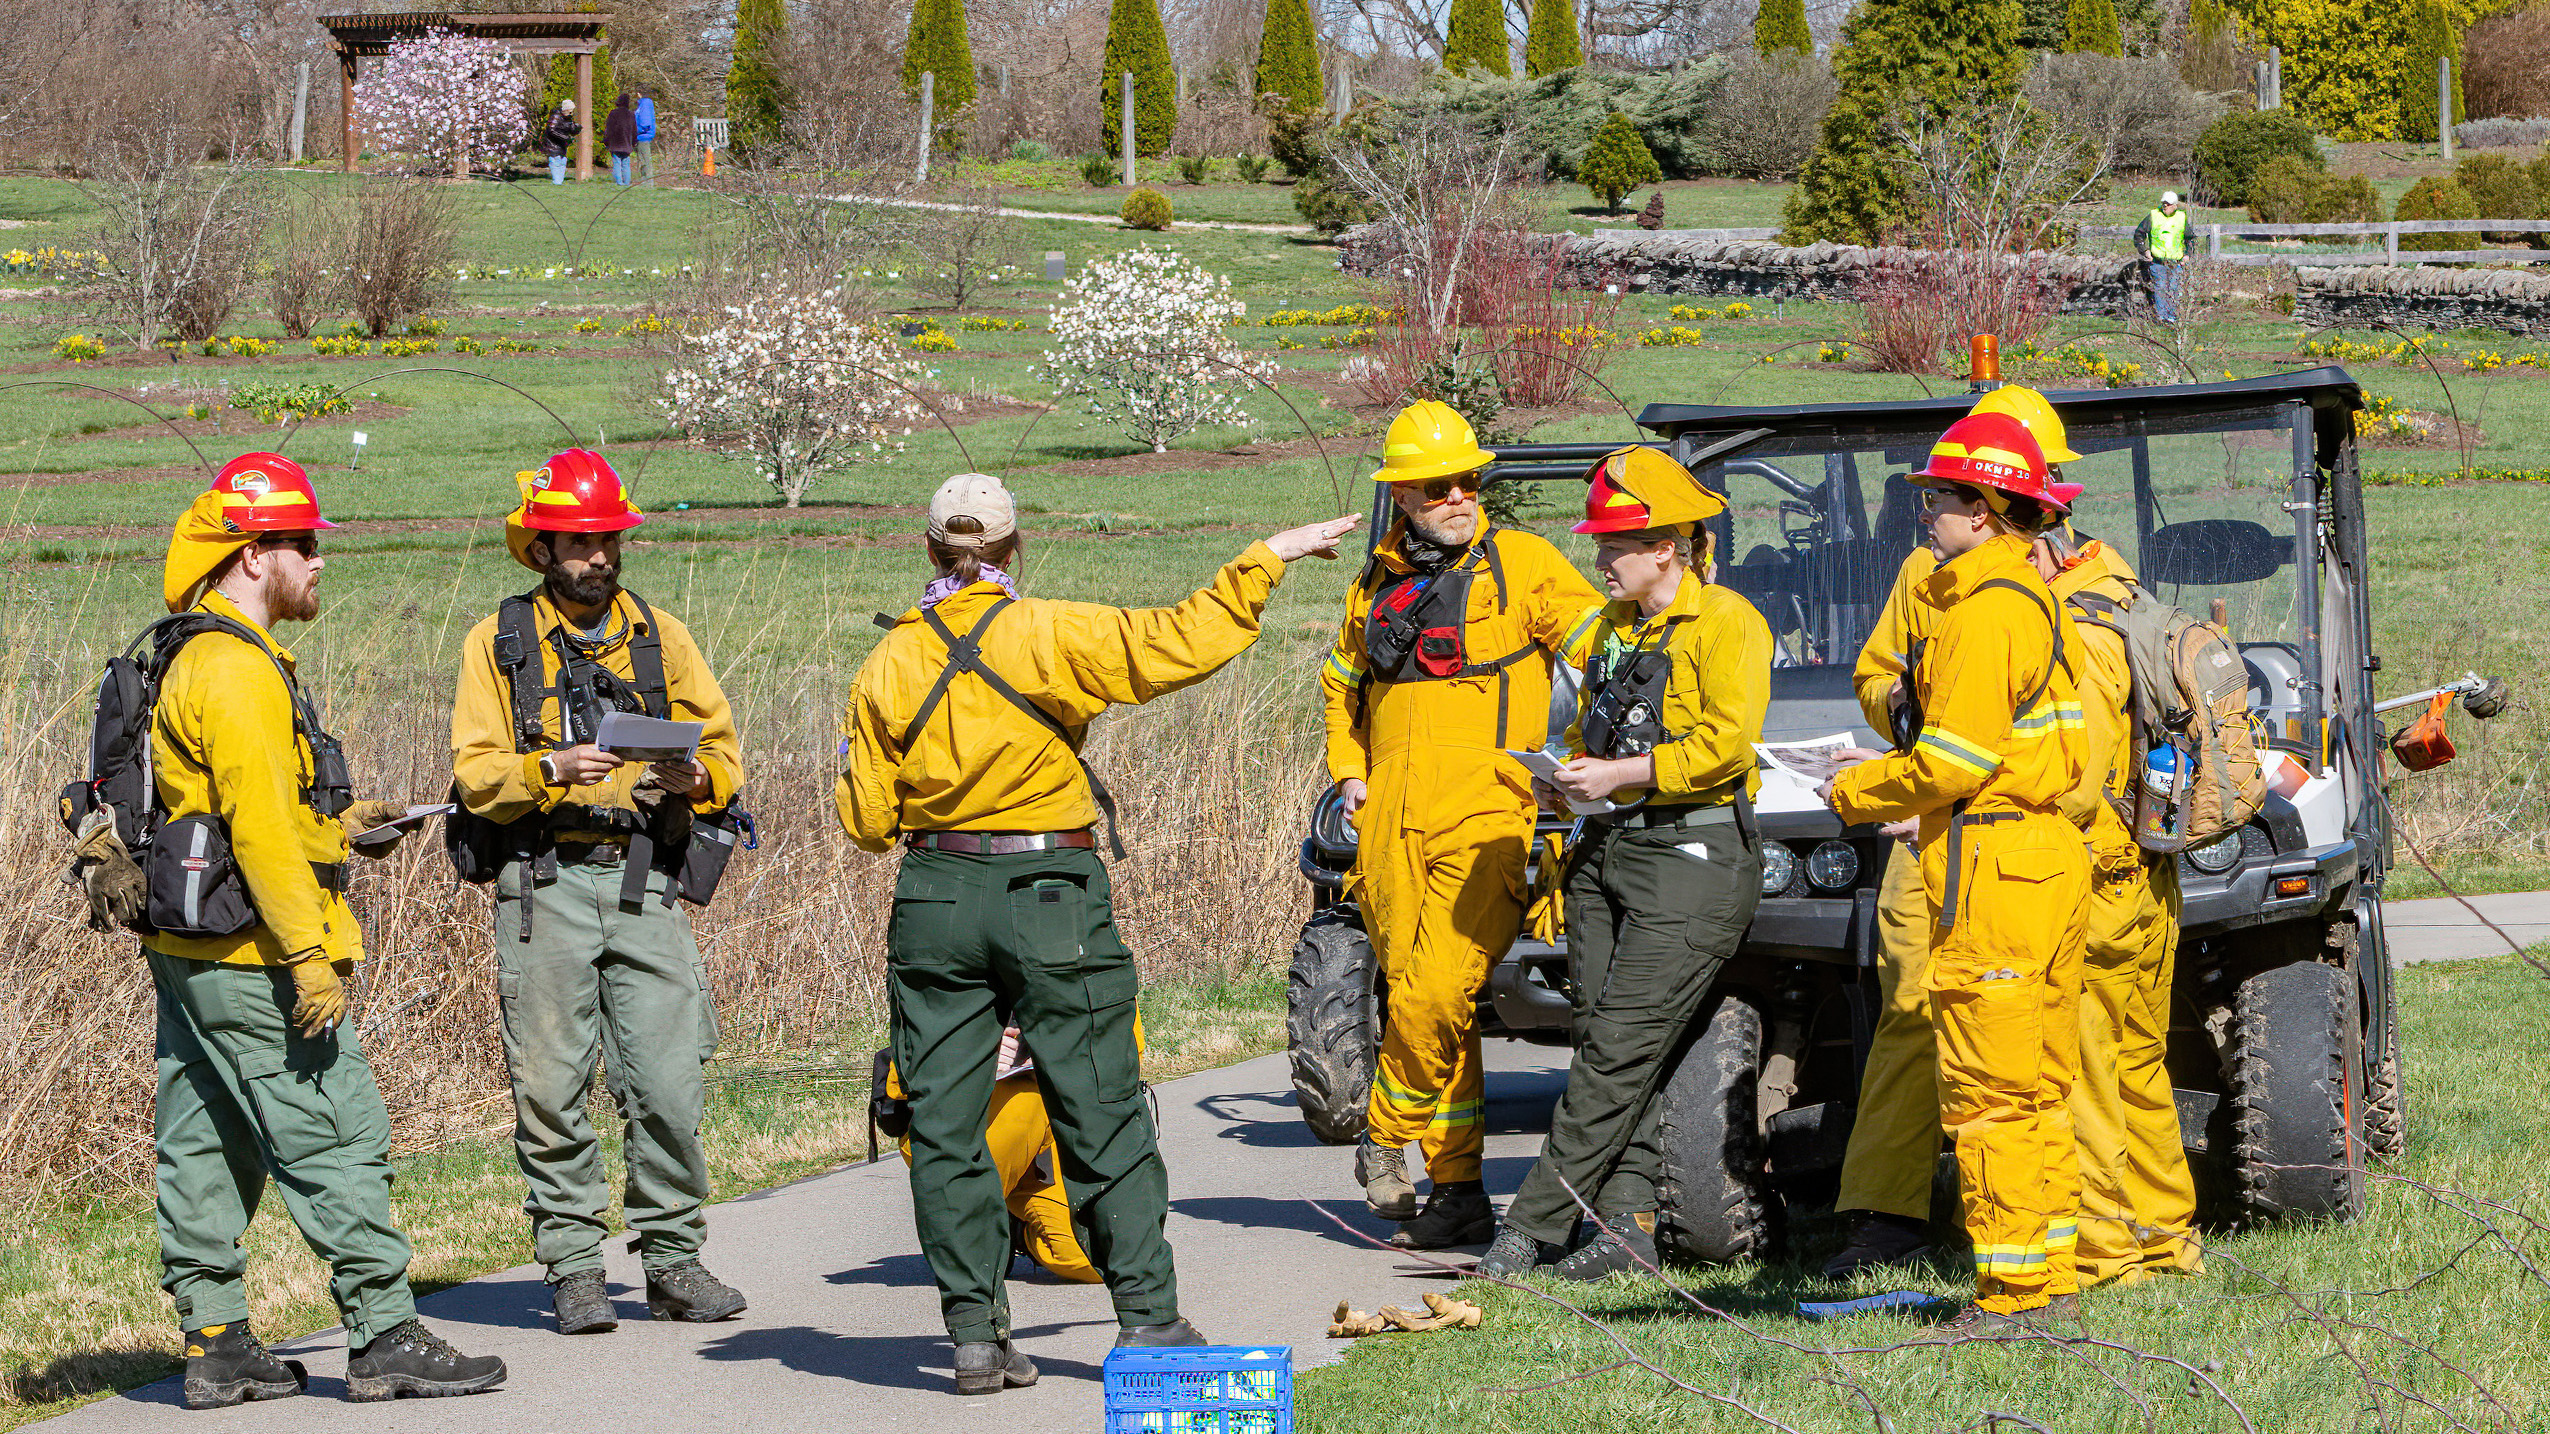 Team coordinating the prescribed fire at The Arboretum. Photo by Ward Ransdell.